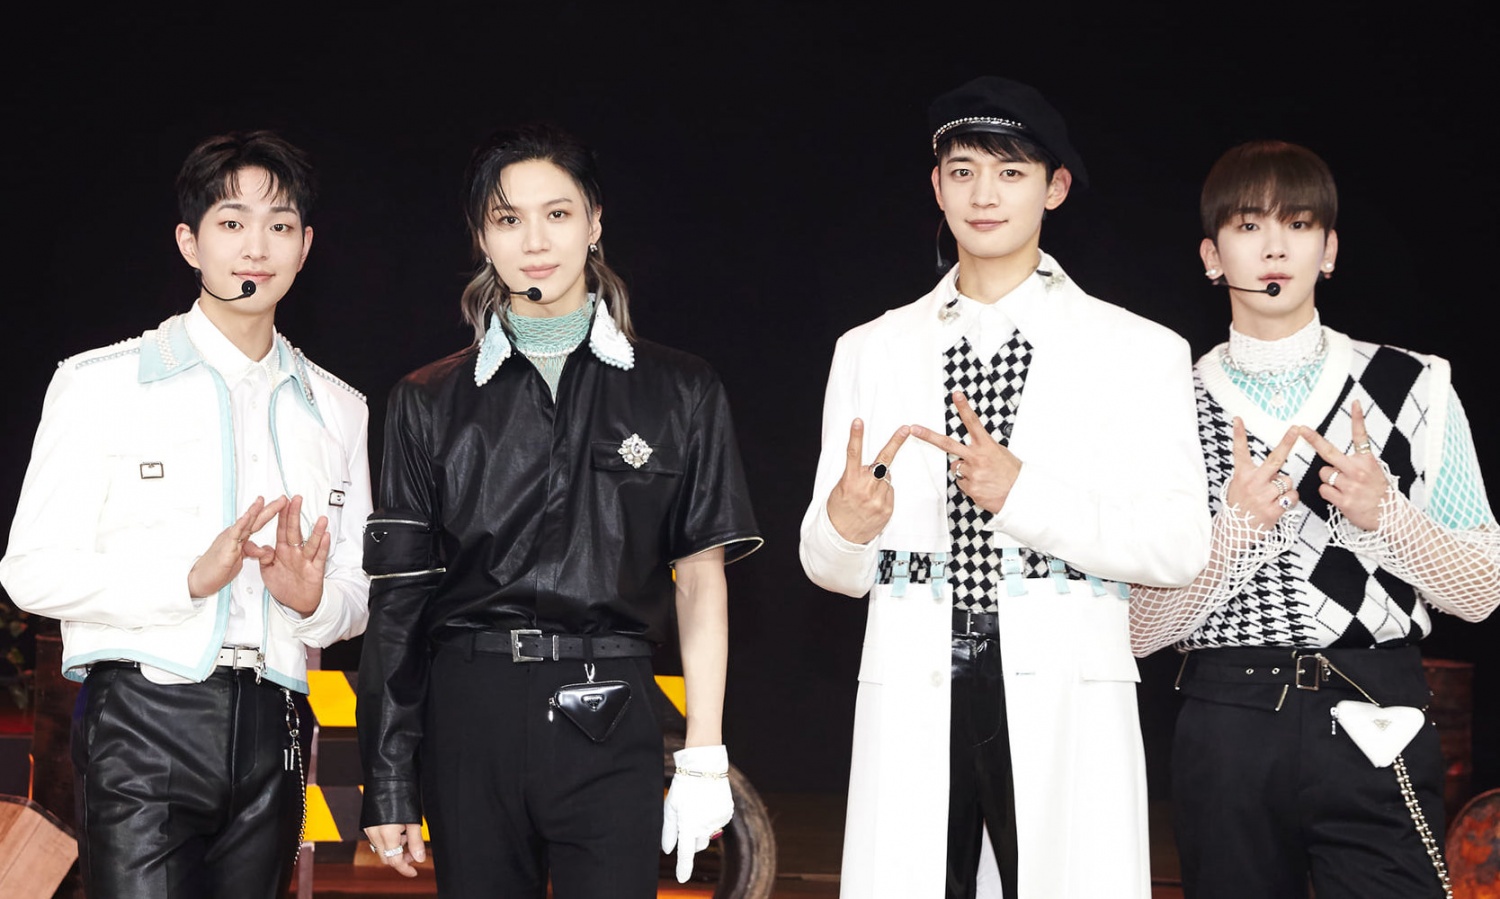 Missing SHINee?  The latest activities of Onew, Minho, Key and Taemin